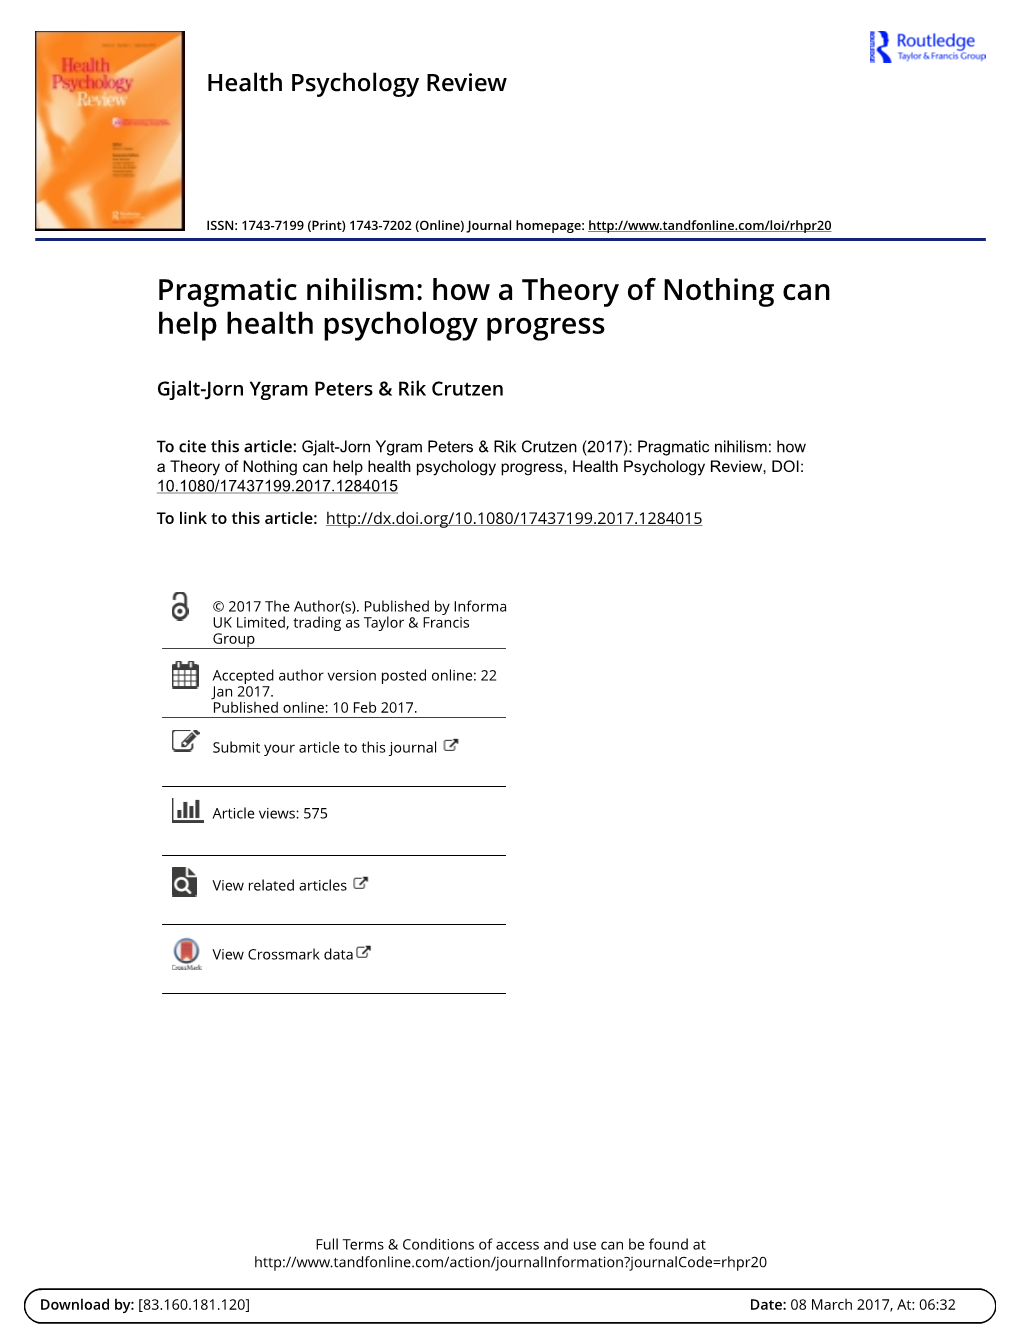 Pragmatic Nihilism: How a Theory of Nothing Can Help Health Psychology Progress